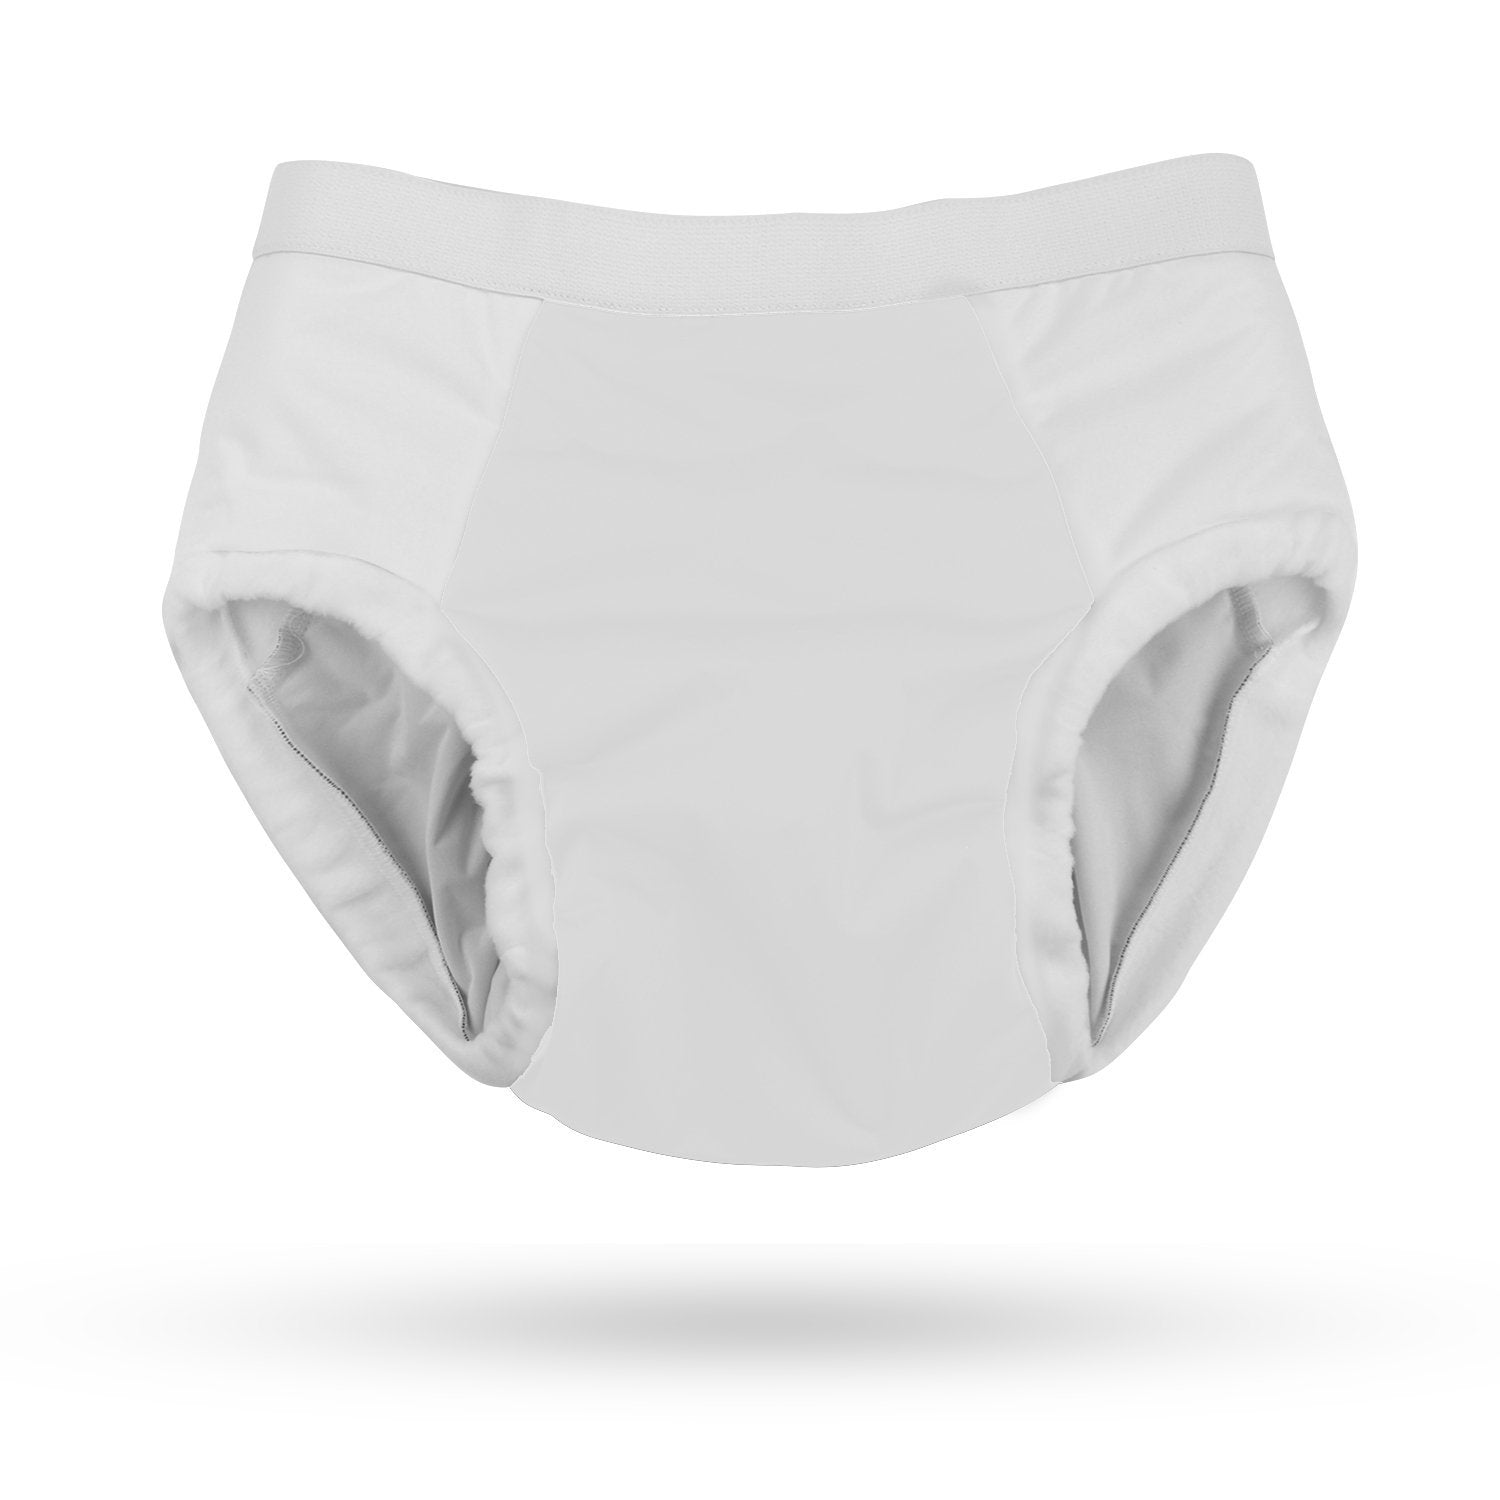 Protective Briefs with Snaps